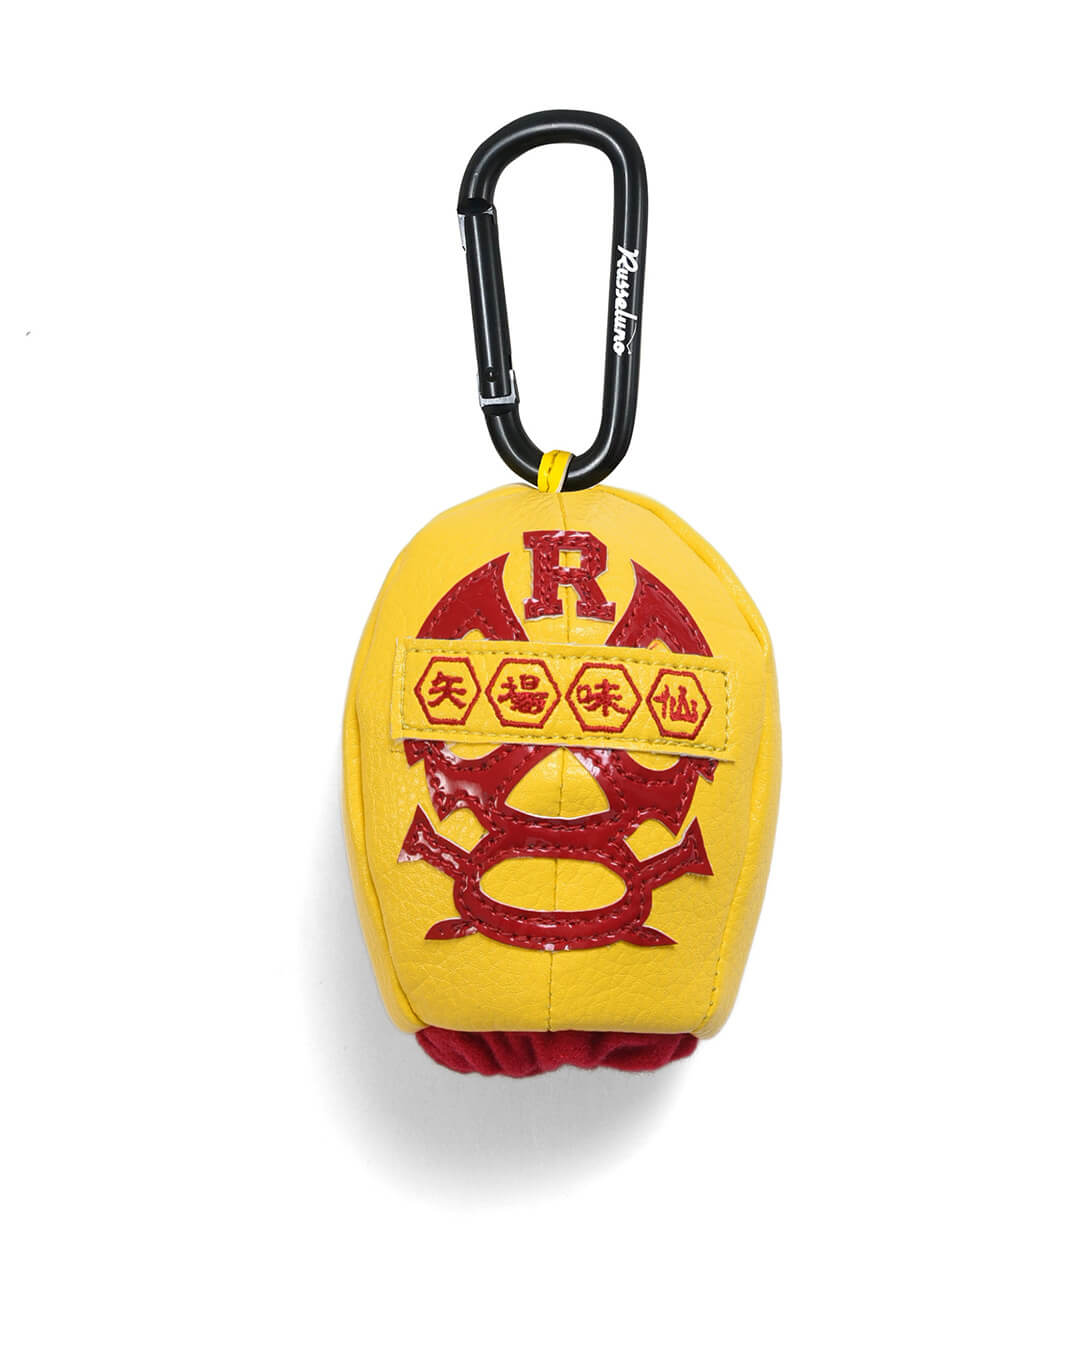 Russeluno Online Store / 味仙LUCHA BALL HOLDER